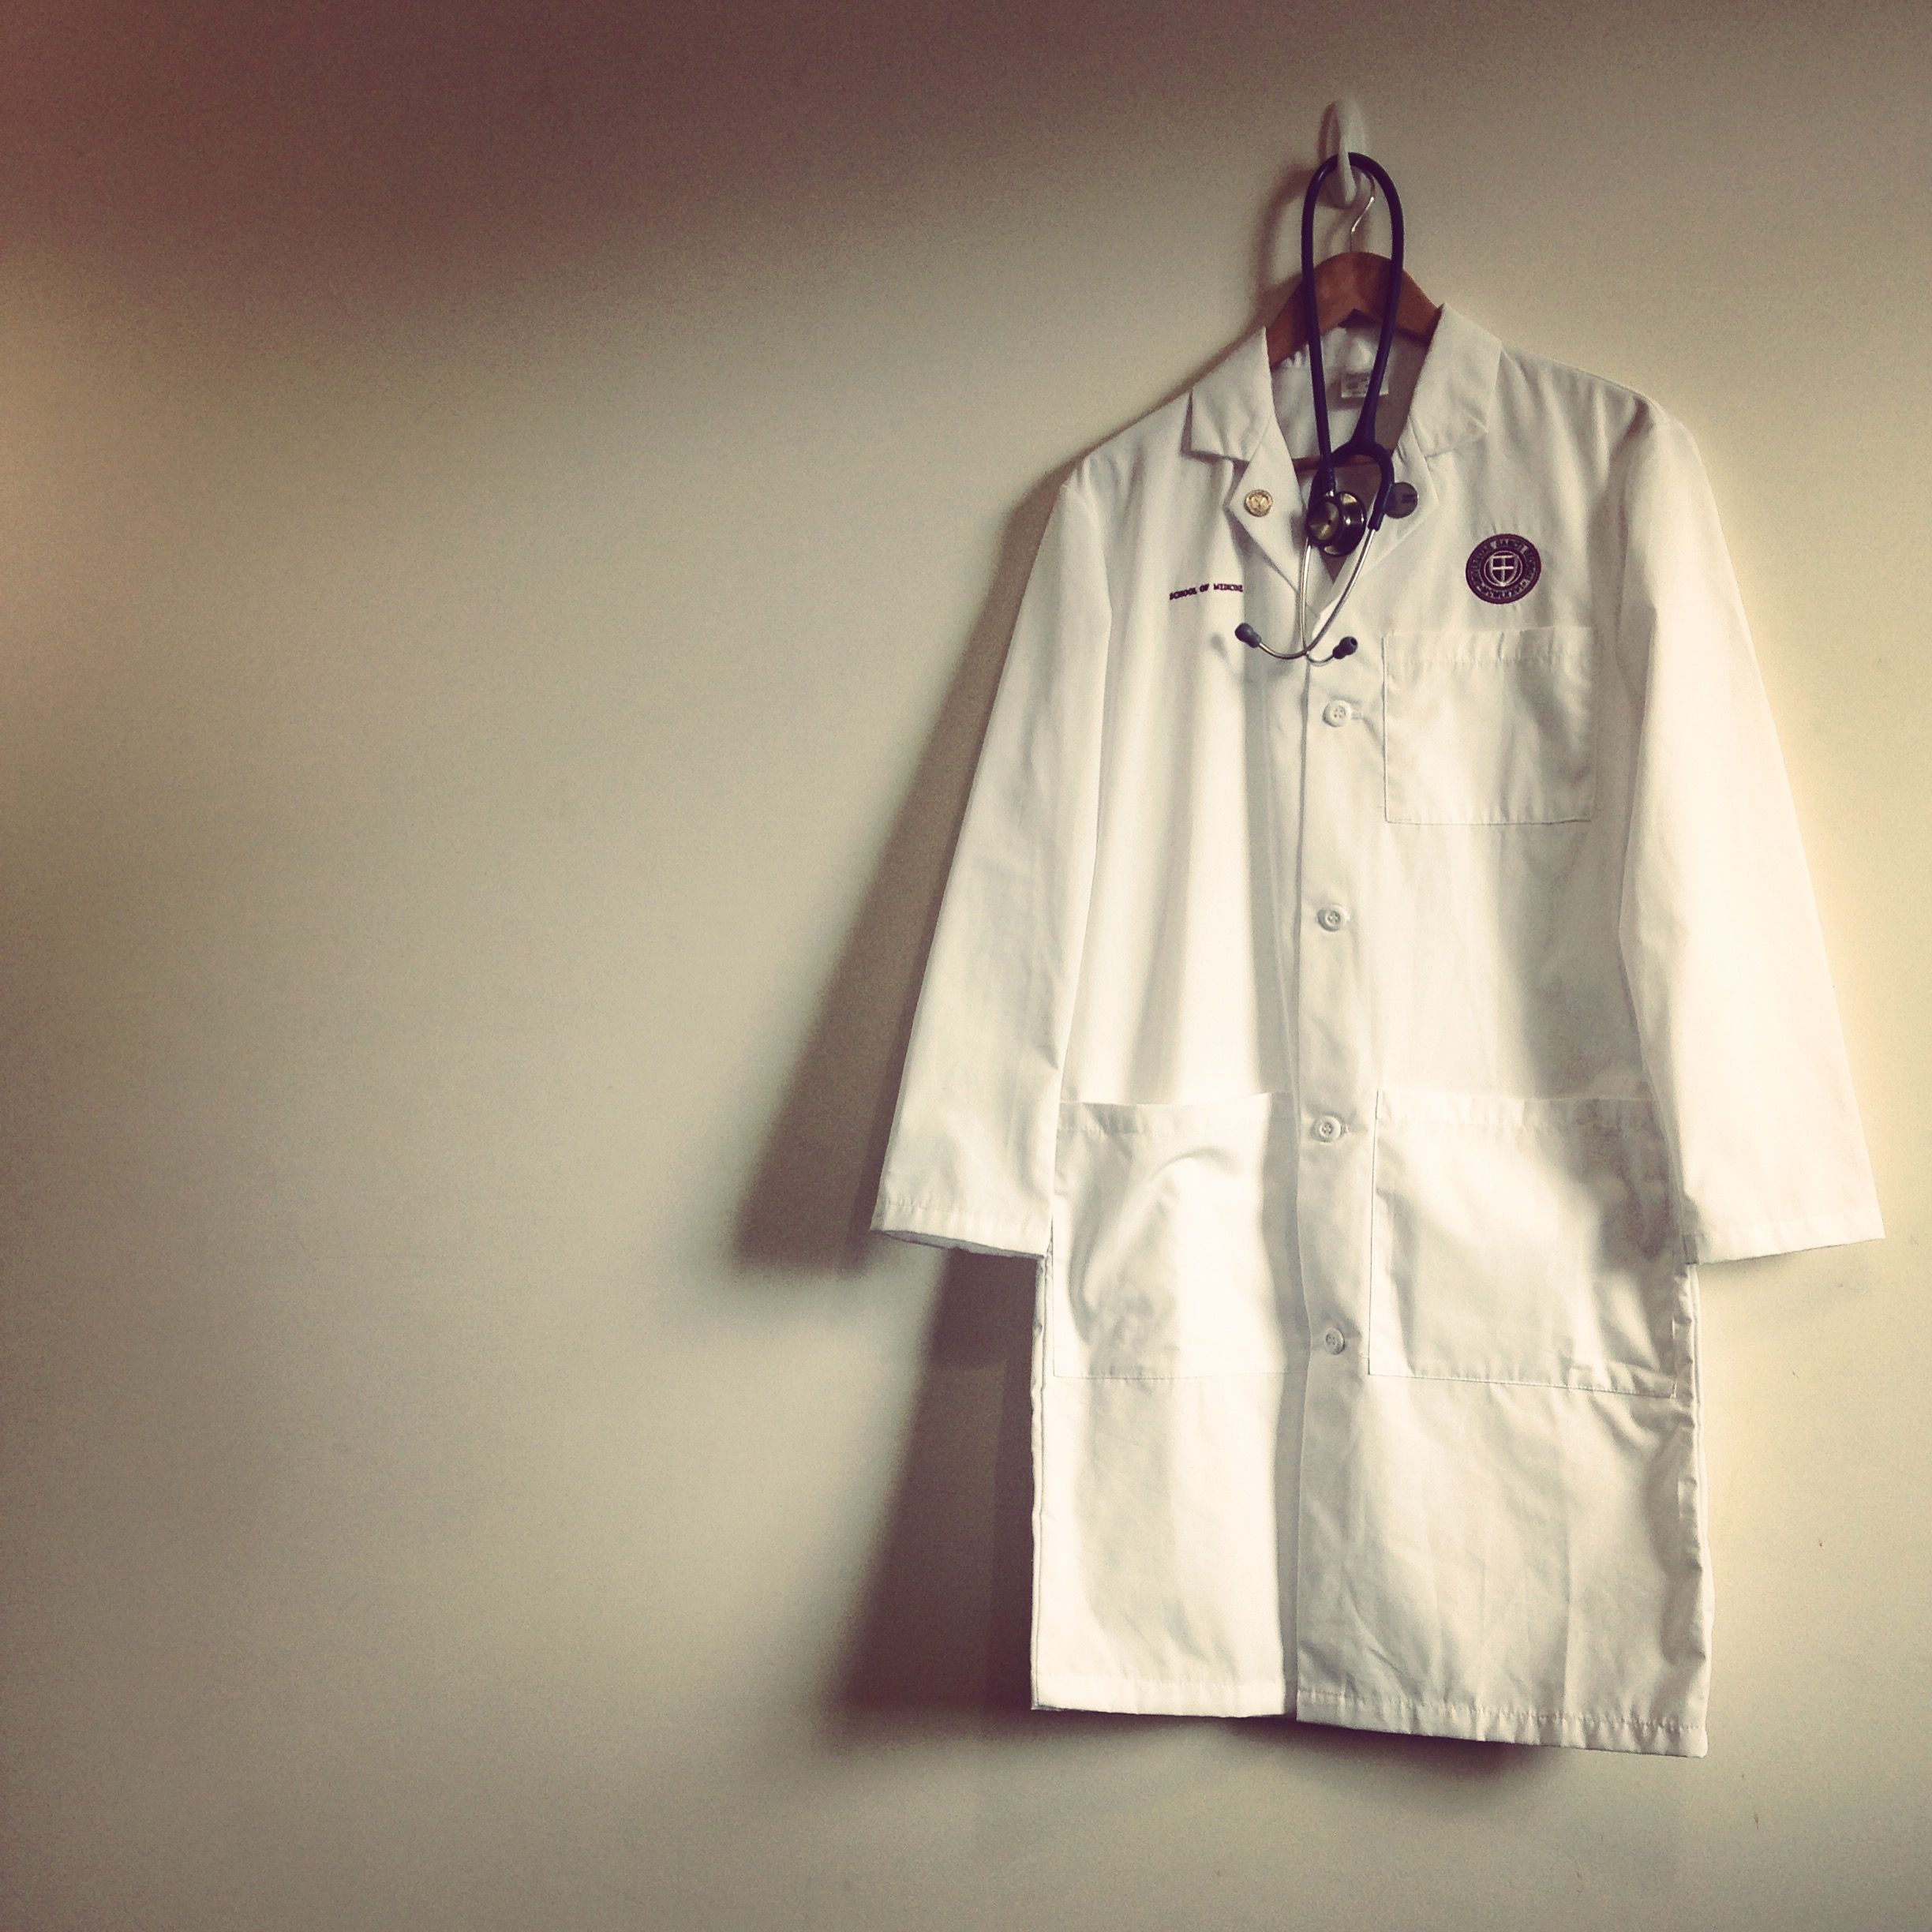 It's all about the white coat #goals. Med school motivation, Med school, Medical